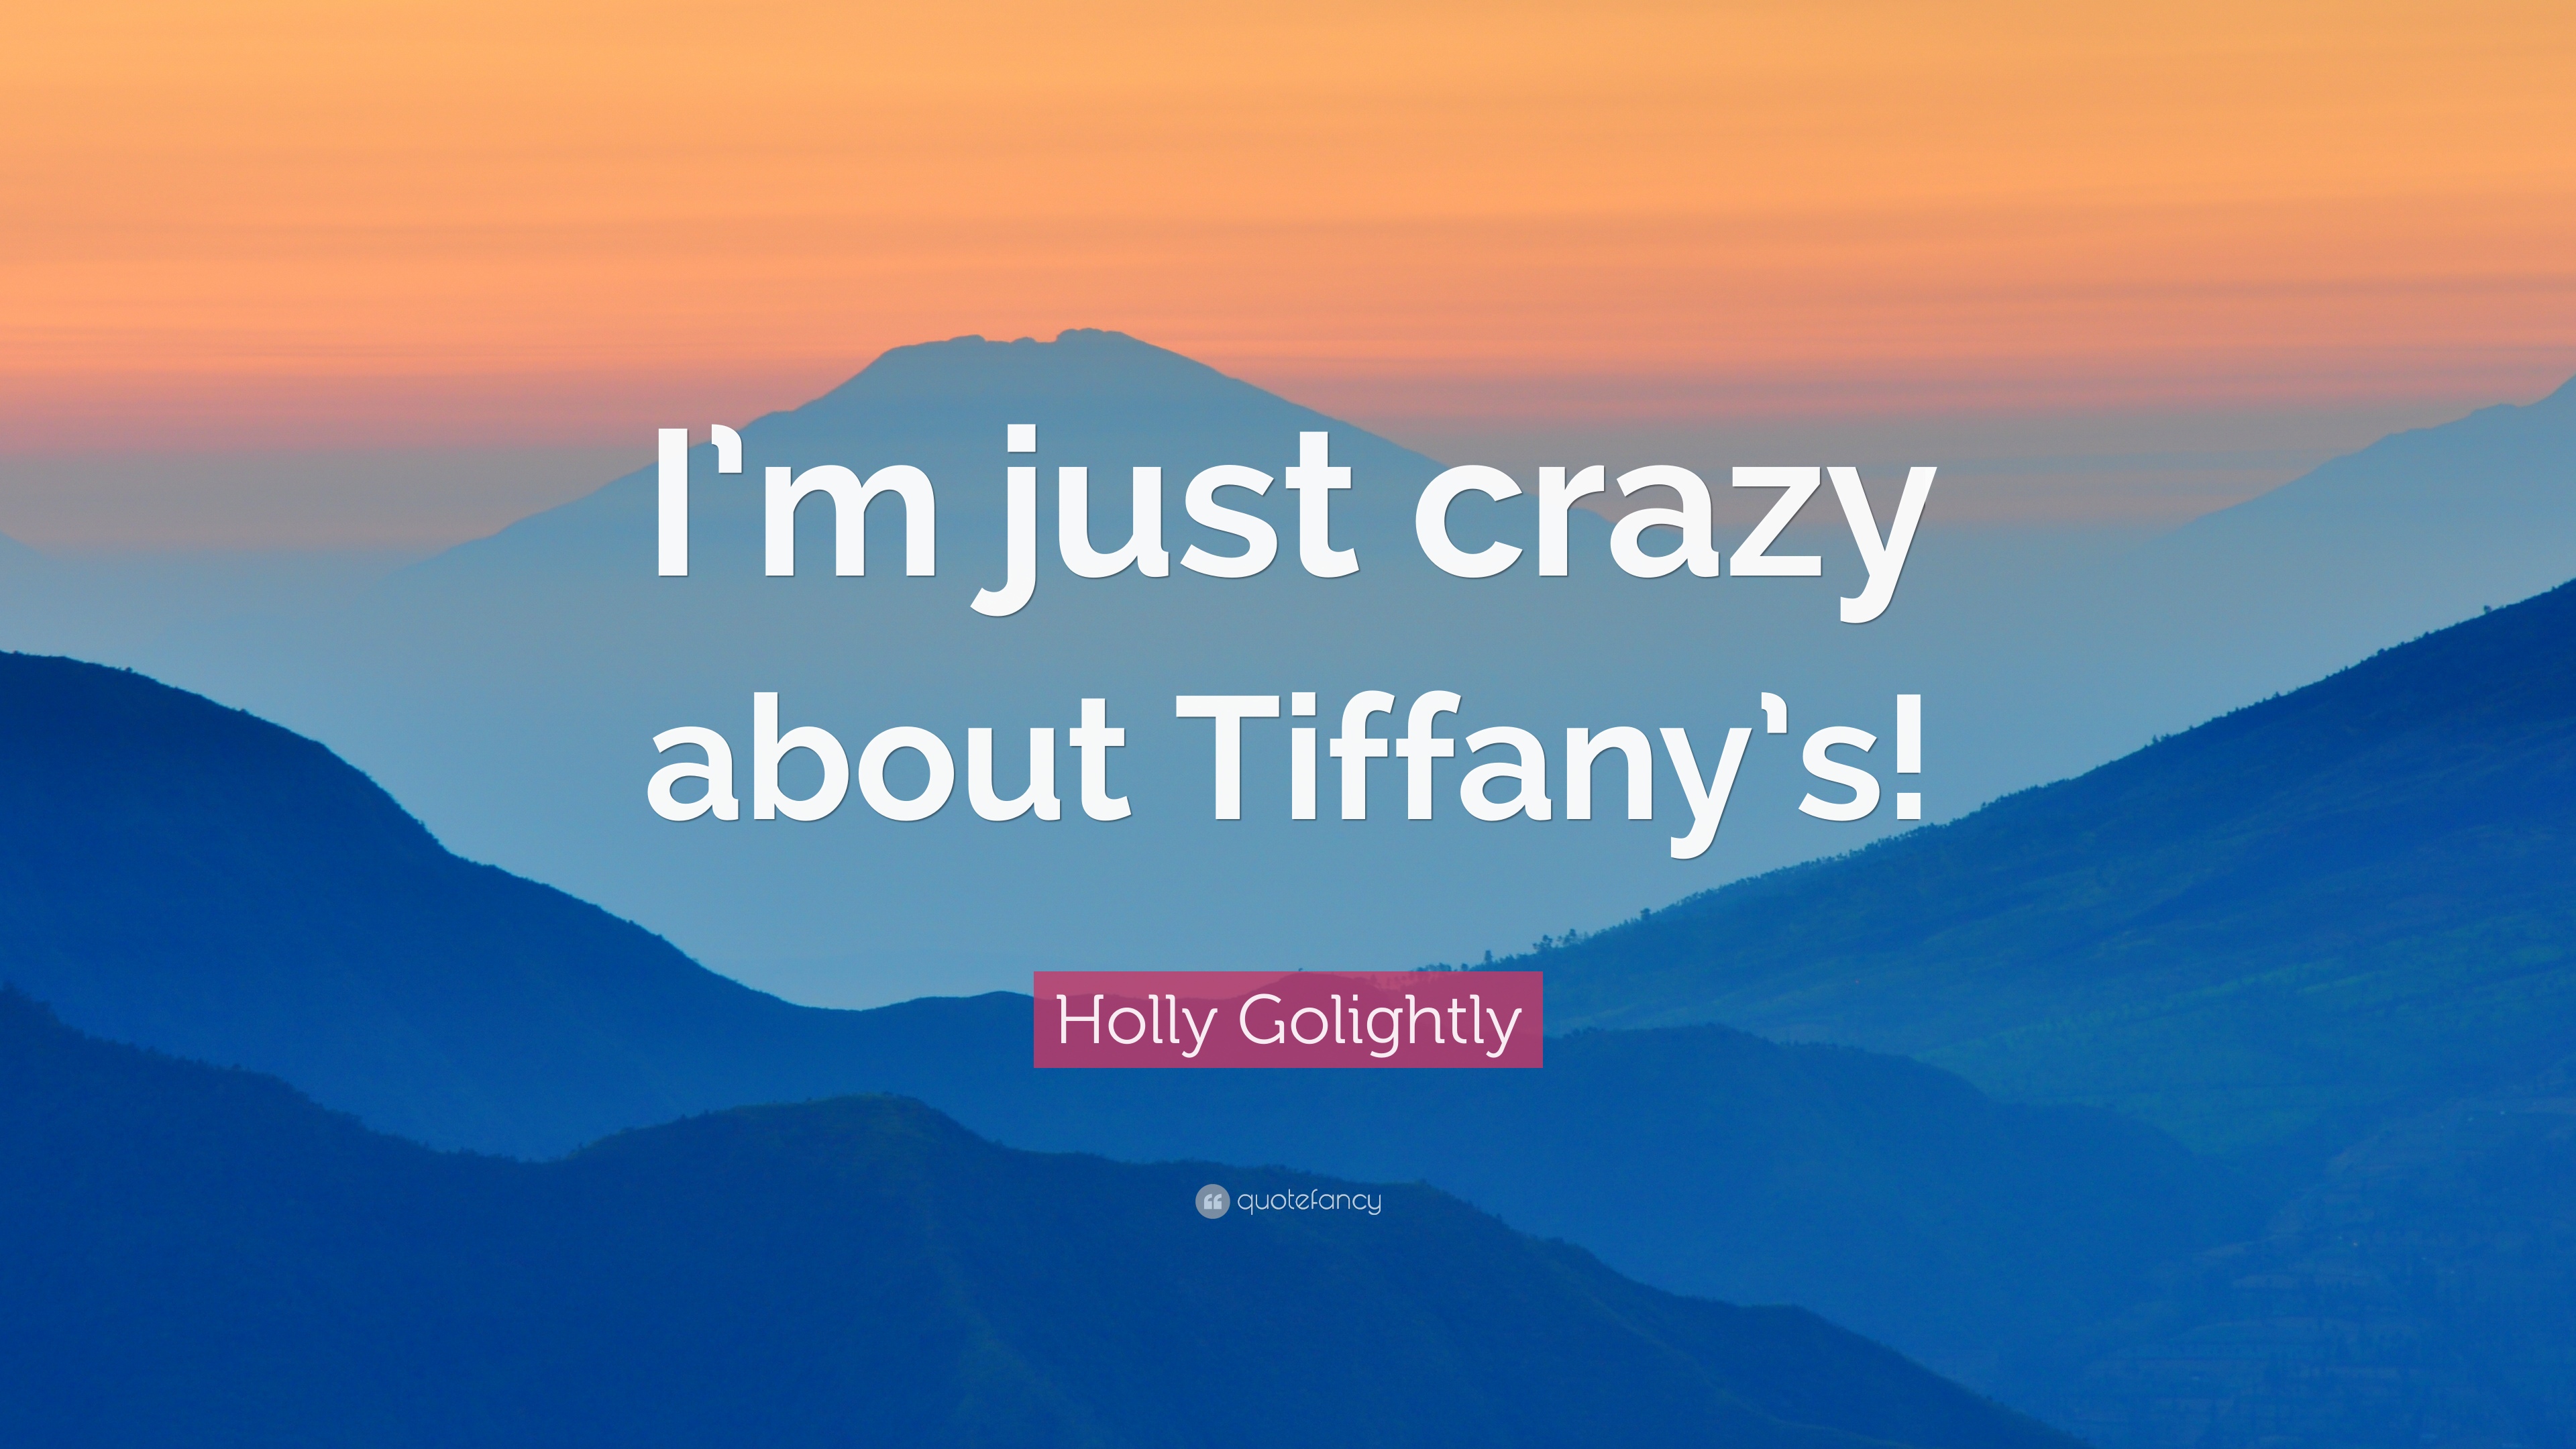 Holly Golightly Quote: “I'm just crazy about Tiffany's!”